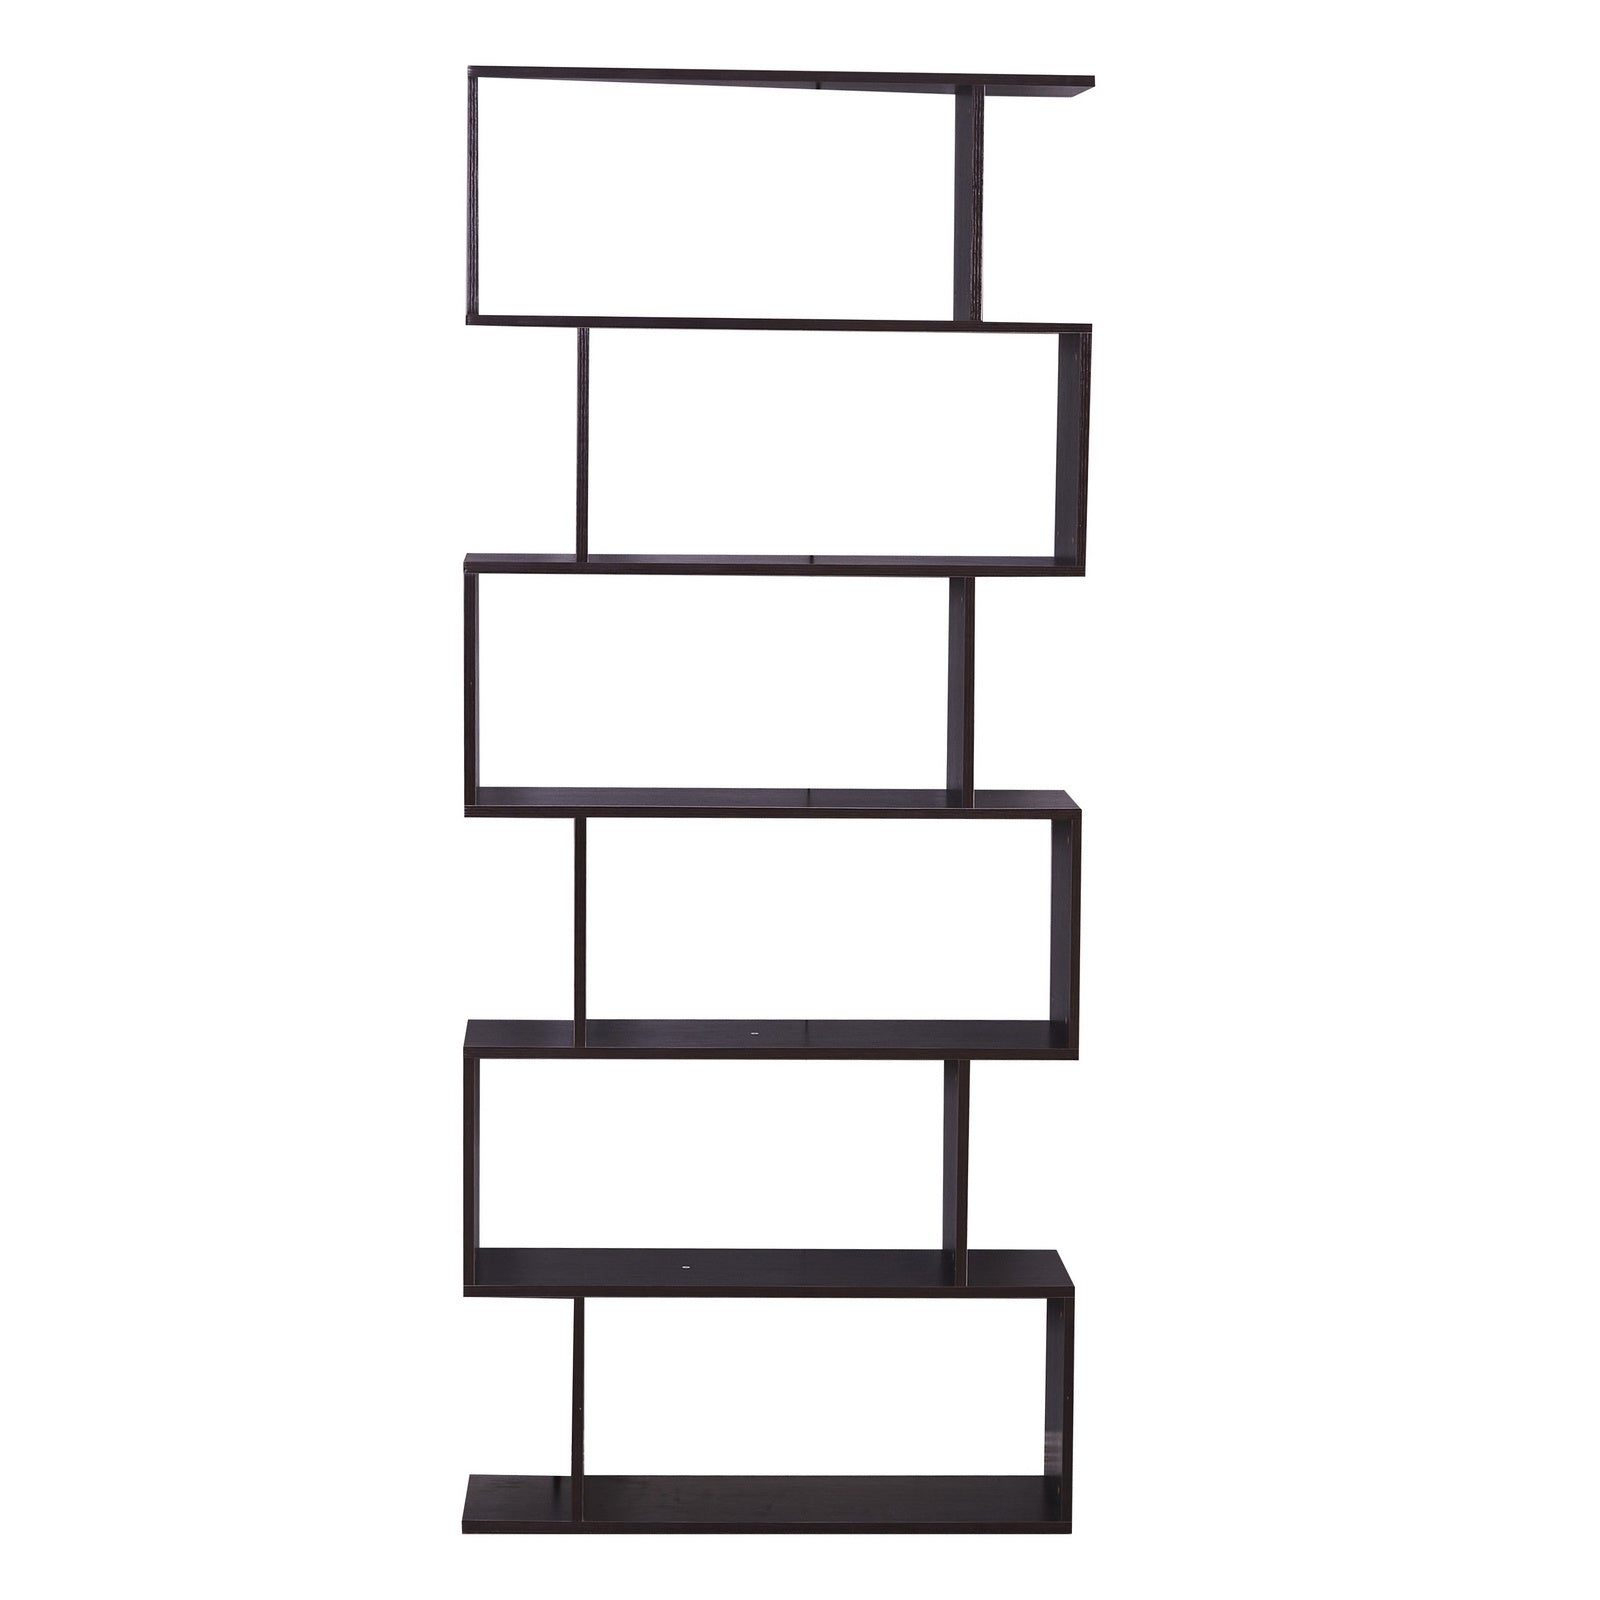 A 6 Shelf Bookcase, Modern S-Shaped Z-Shelf Style Bookshelf filled with books, vases, and decorative items on a white background.